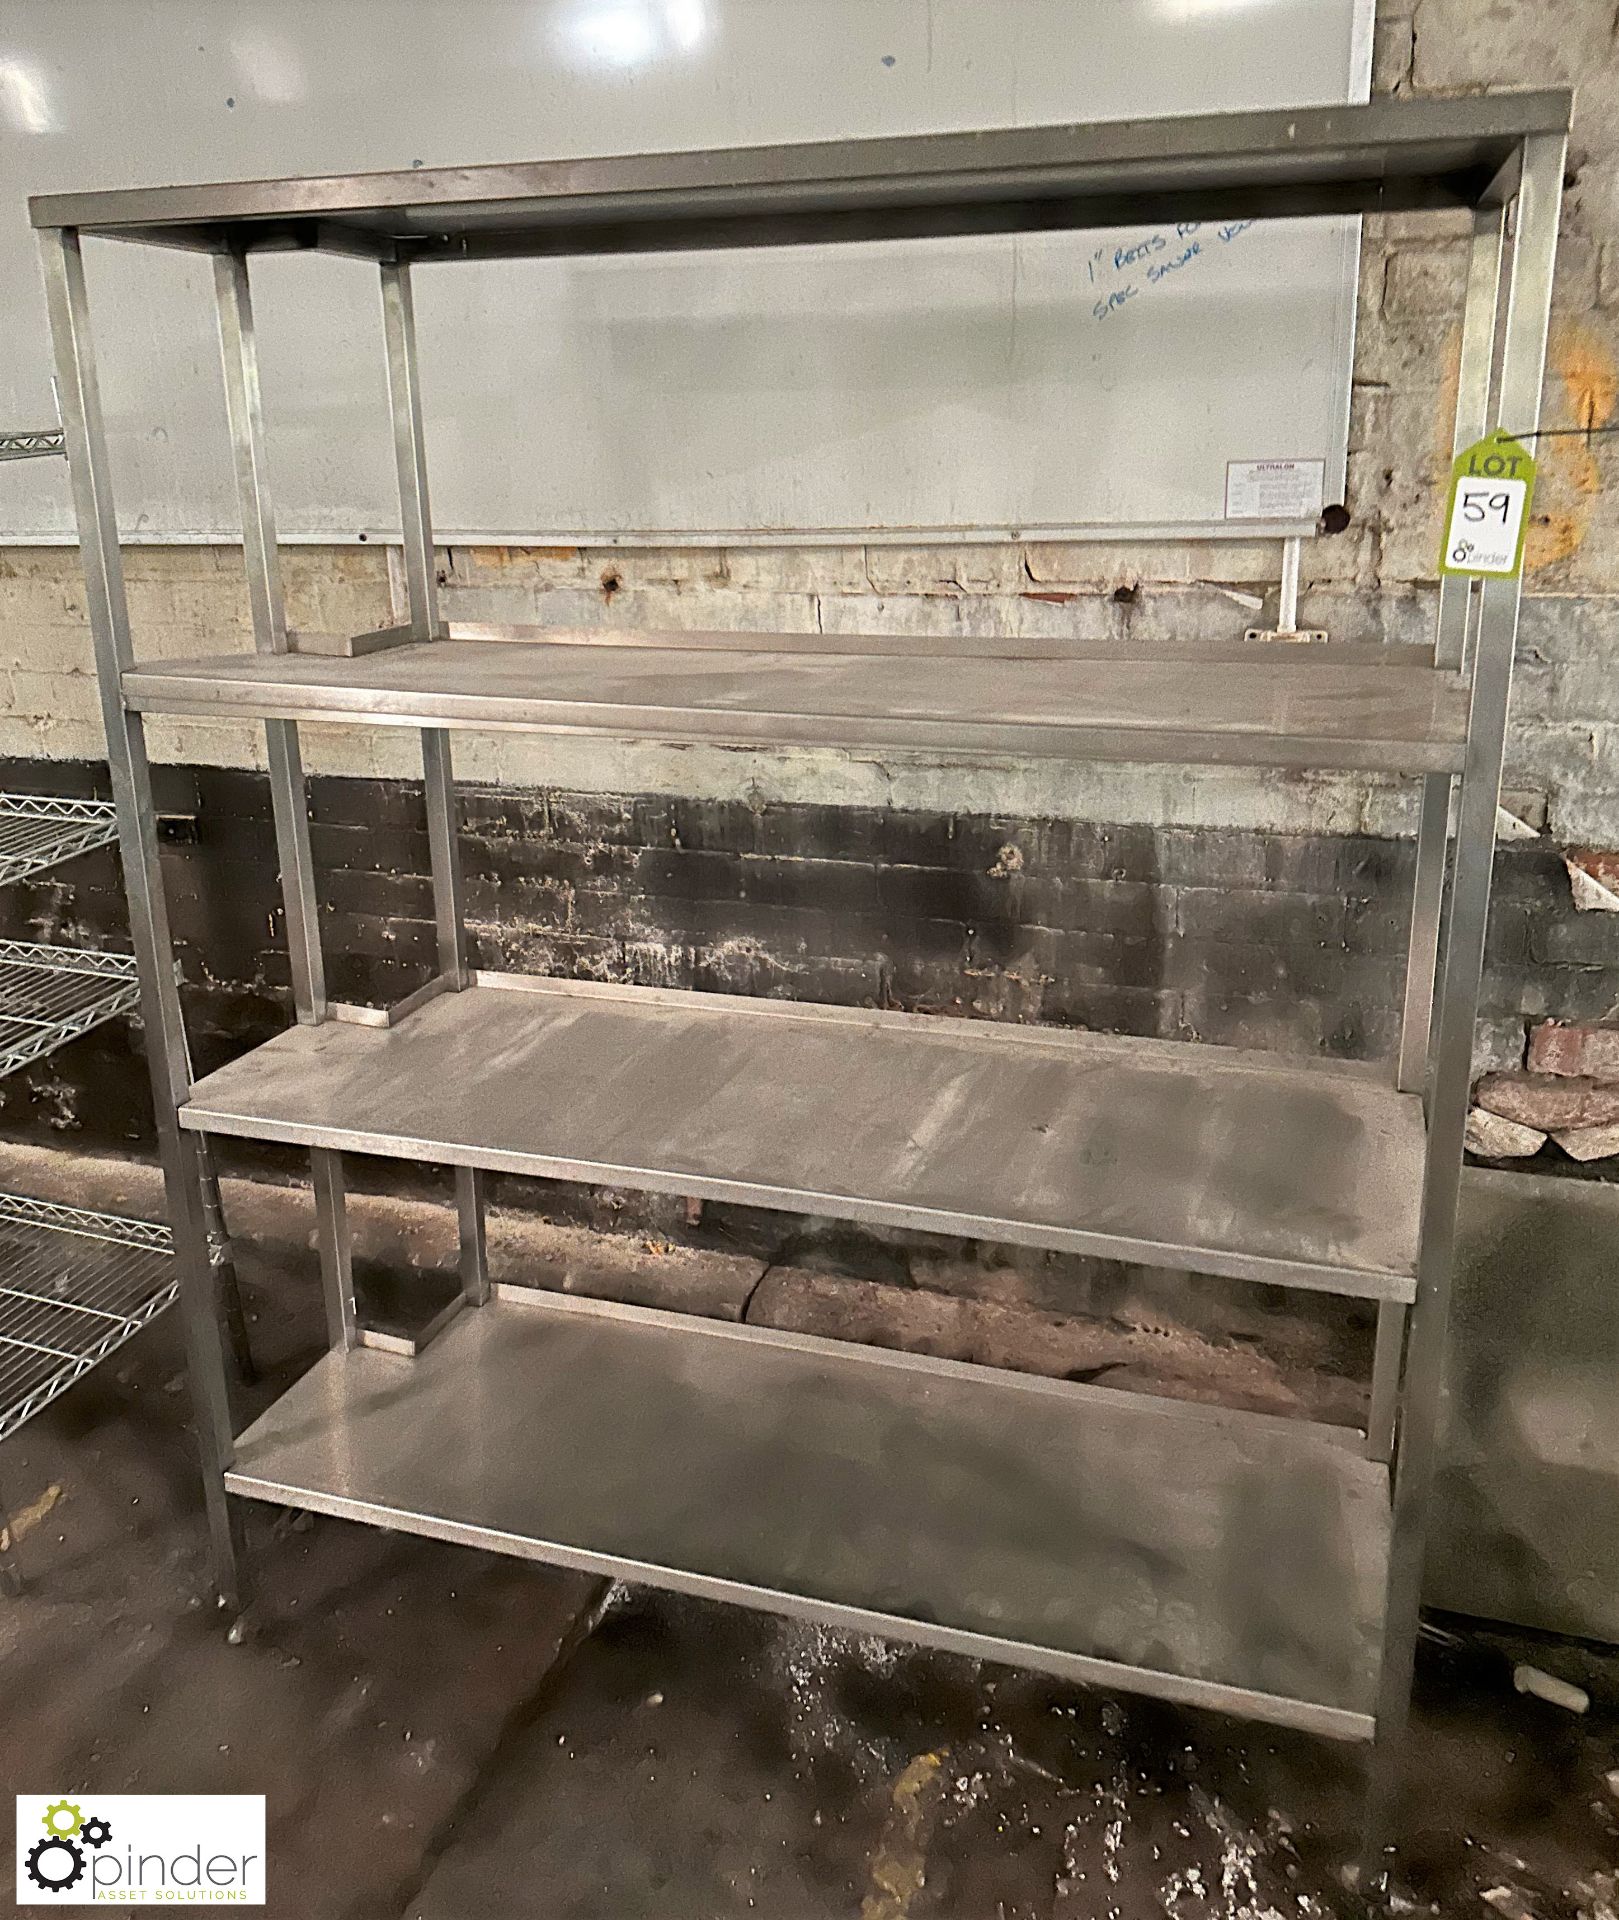 Stainless steel 4-shelf Rack, 1480mm x 490mm x 1840mm - Image 2 of 3